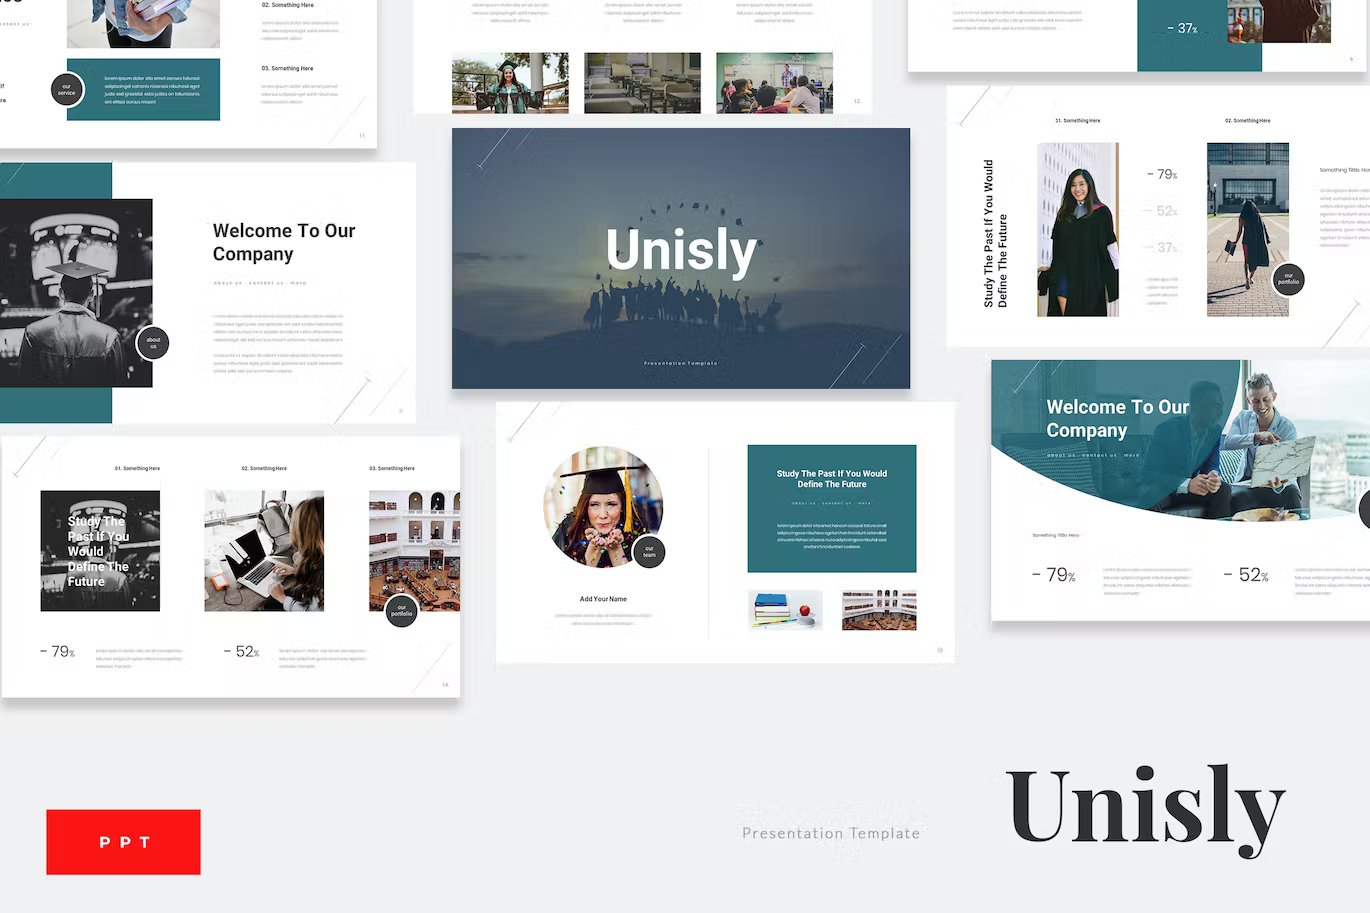 Black lettering "Unisly" and different unisly university education presentation templates in turquoise, white, blue and black on a gray background.